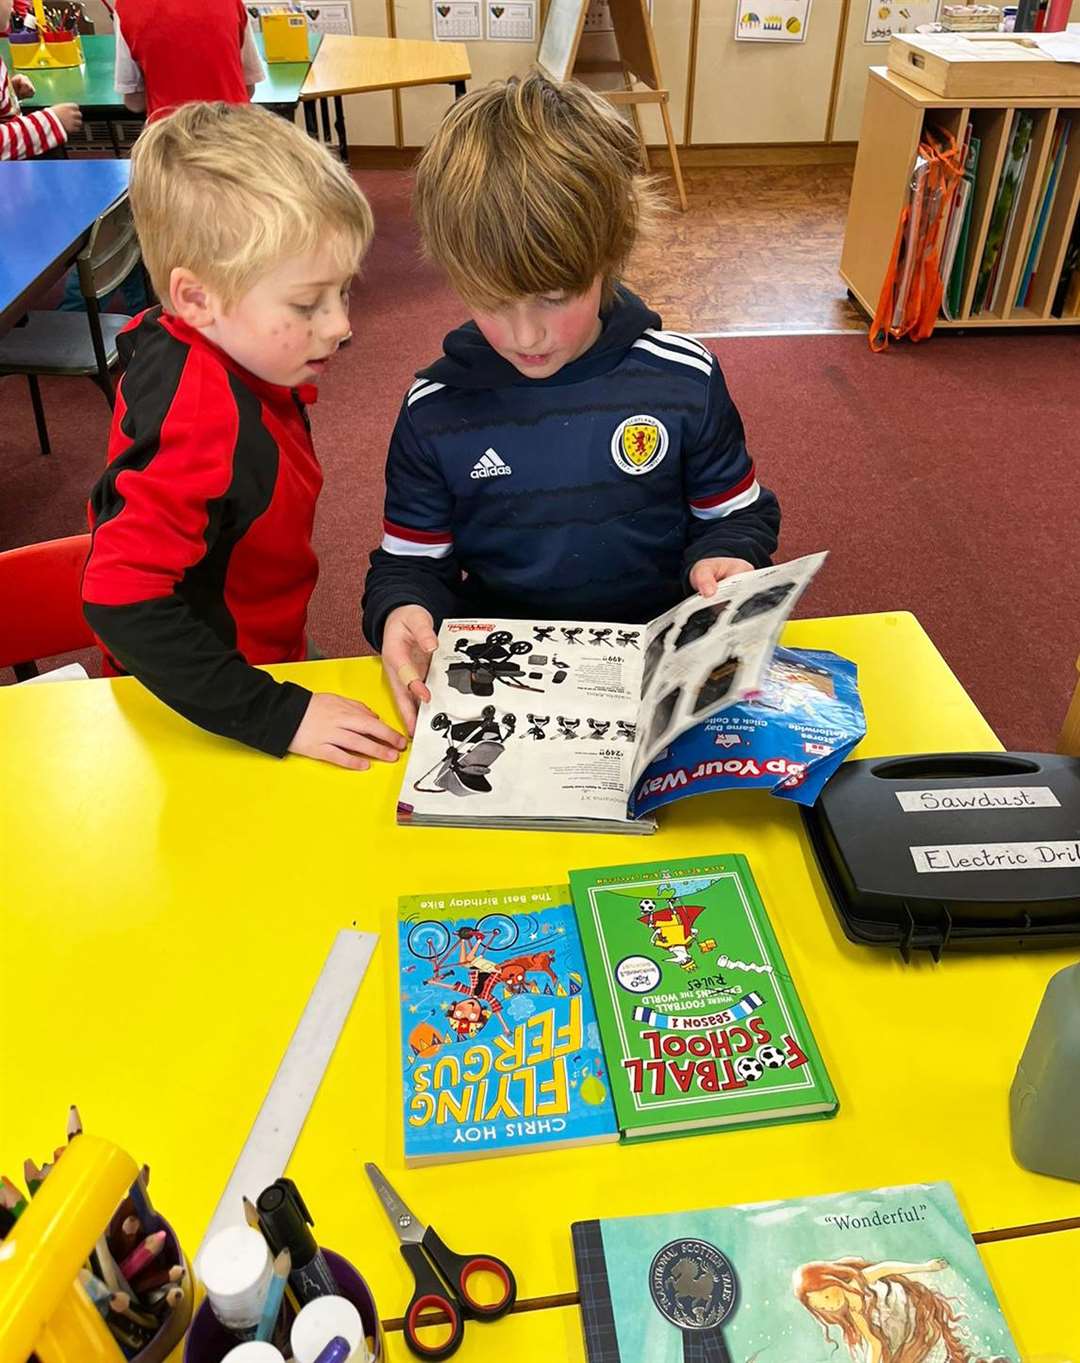 Pupils read for enjoyment but also to find key information.